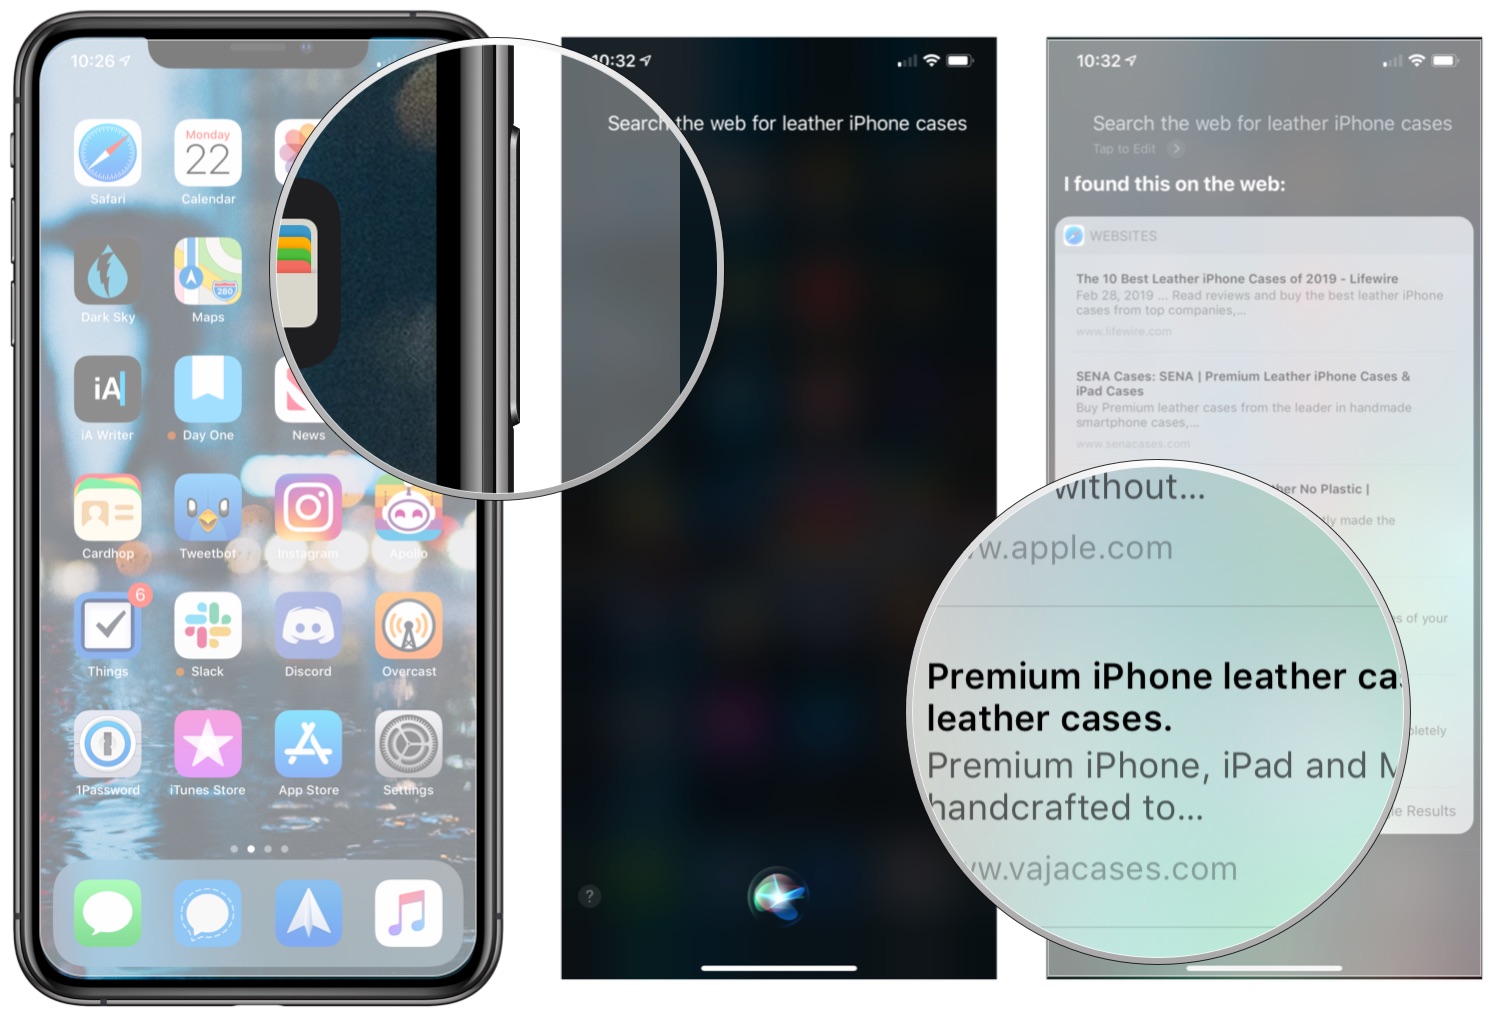 Activate Siri, speak your query, tap on a search result